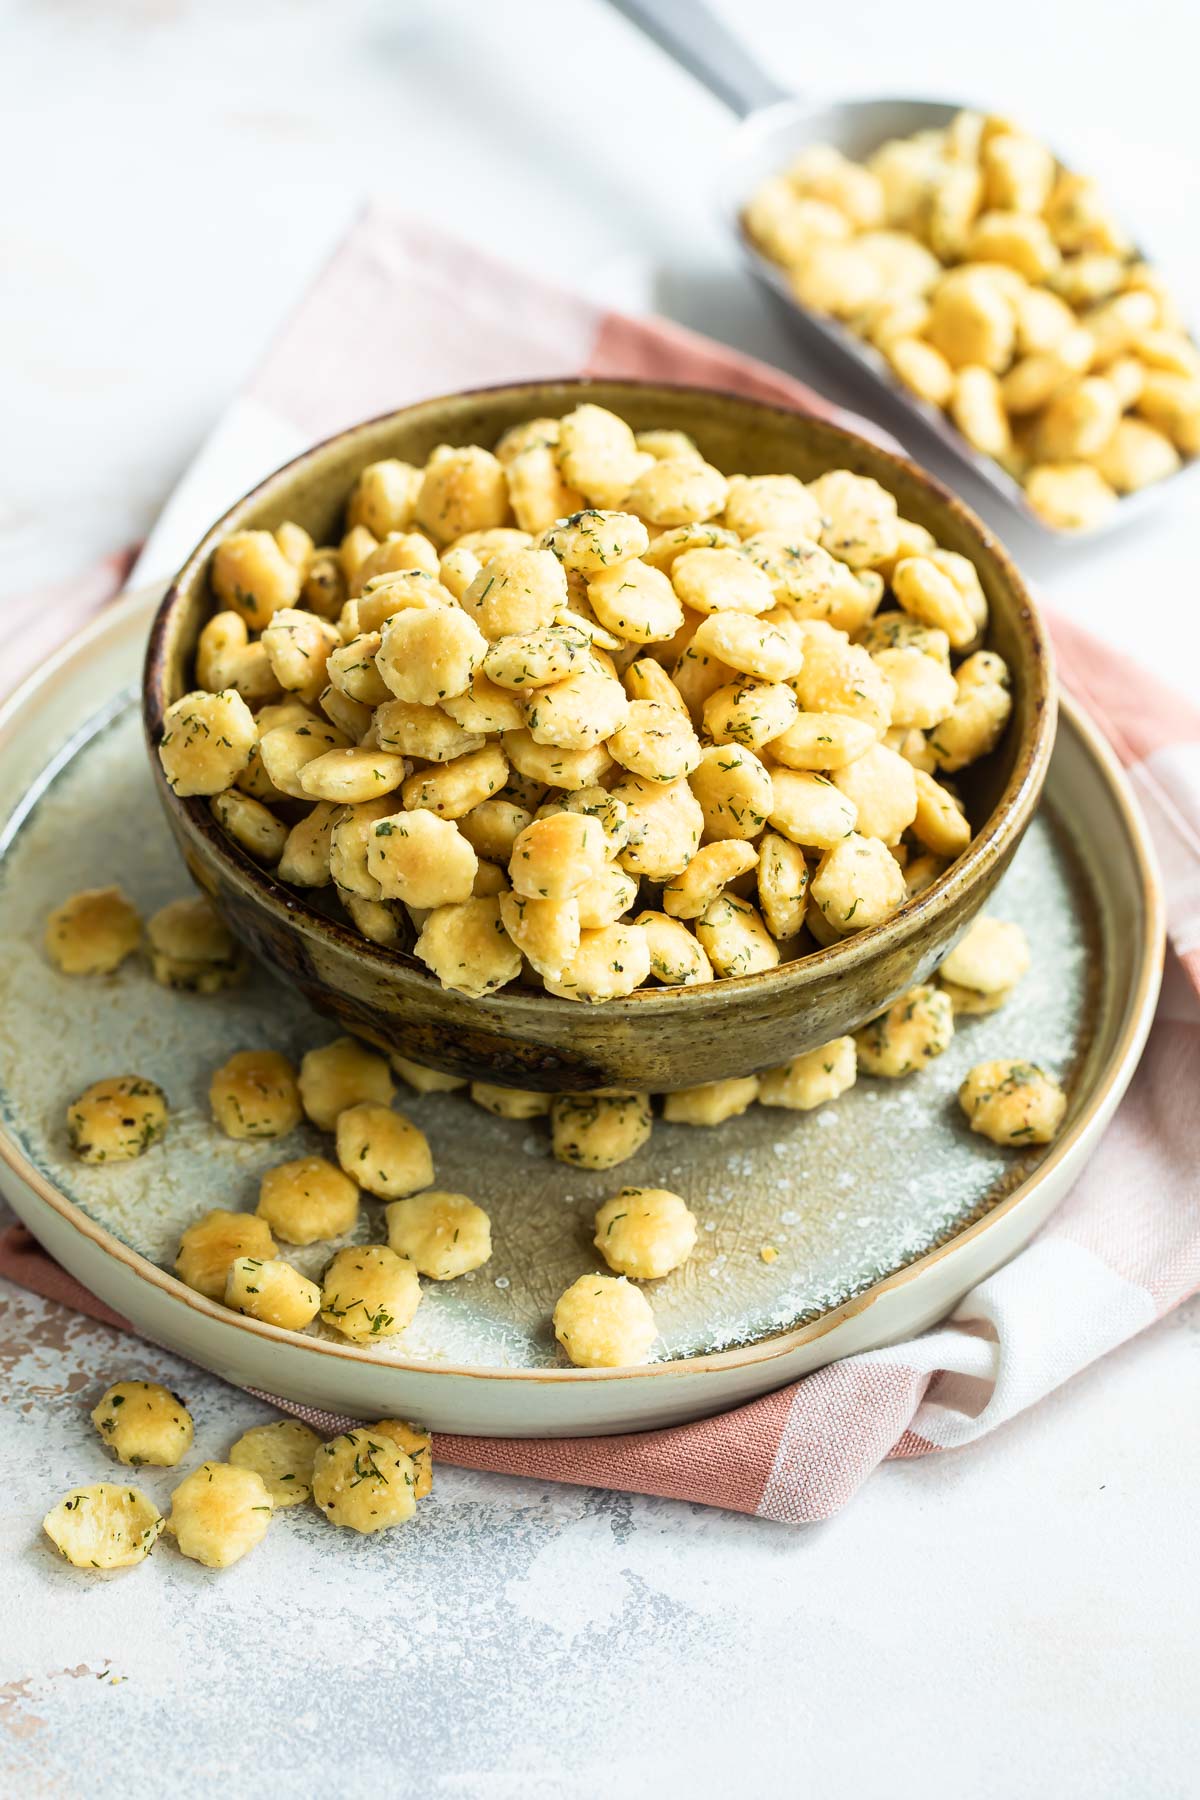 Ranch oyster crackers in a brown bowl.